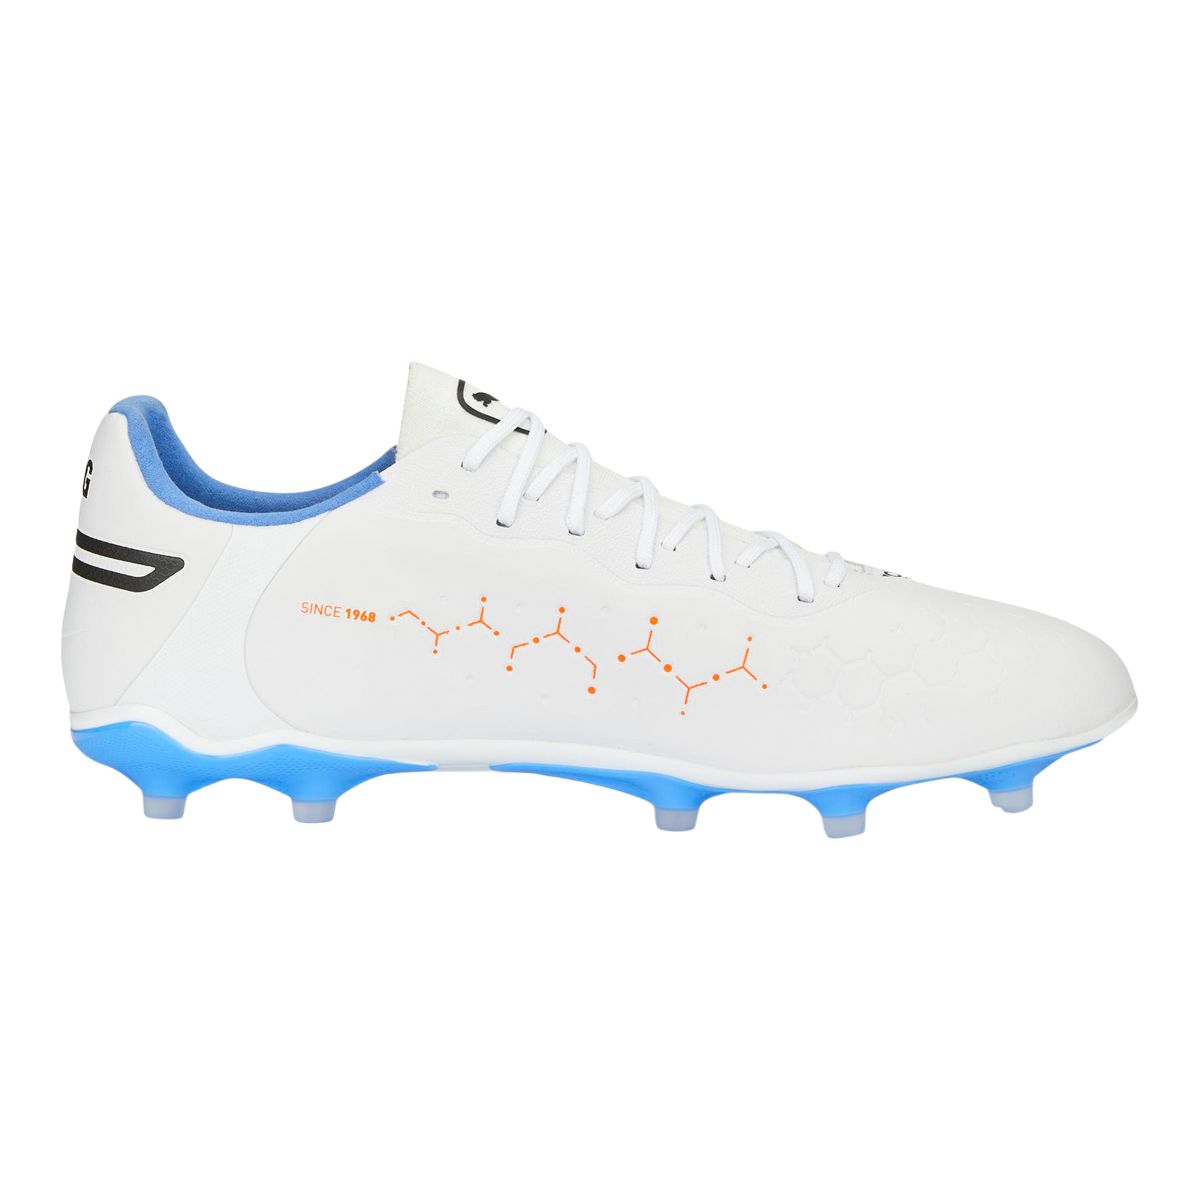 Image of Puma Men's/Women's King Pro Firm Ground Cleats